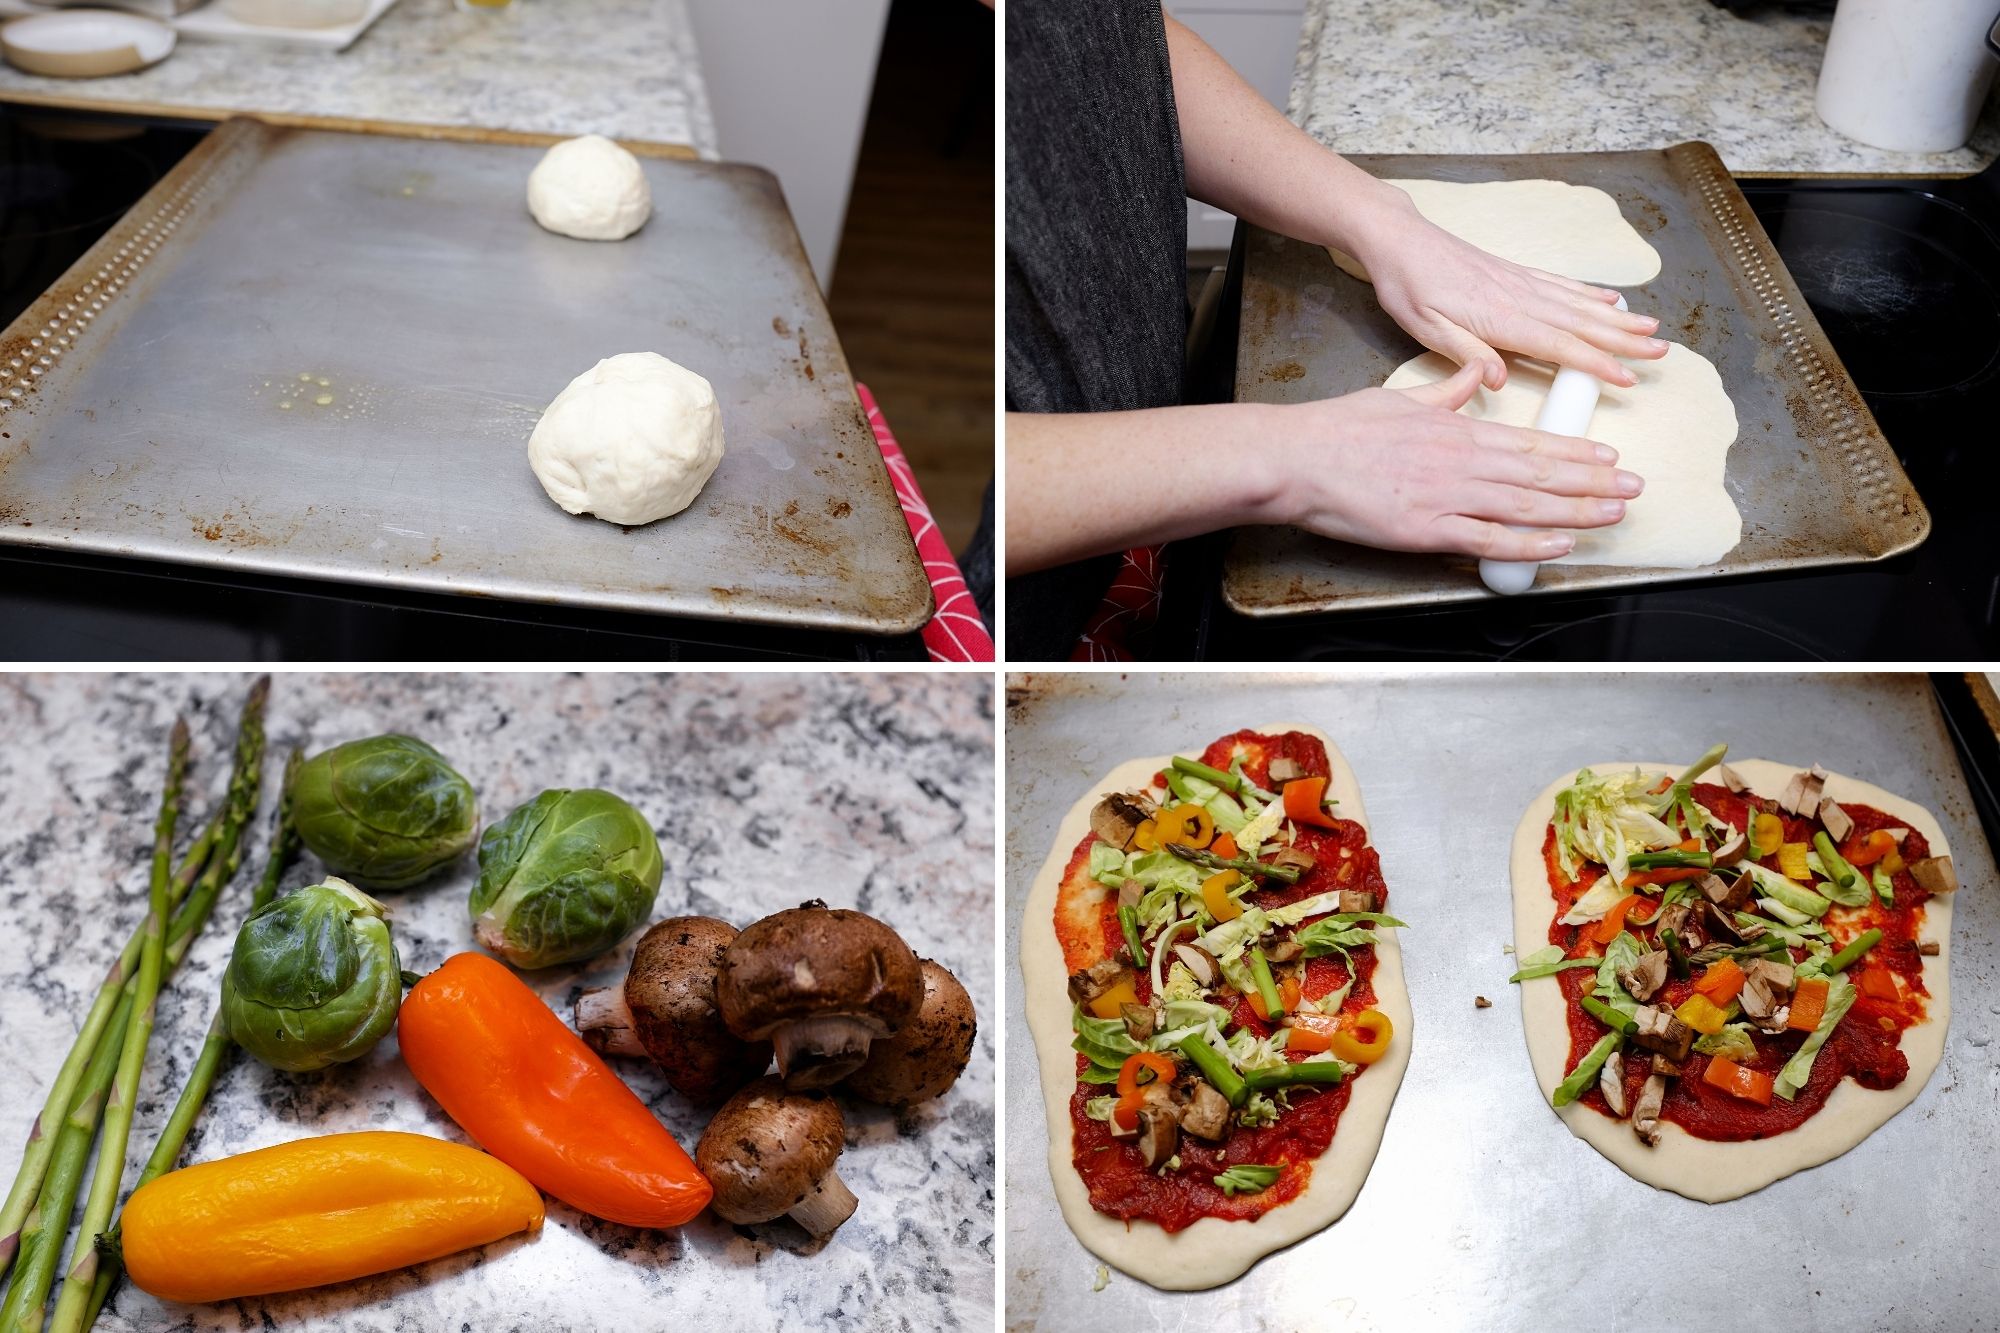 four images: balls of dough on a baking tray, Alyssa rolling the dough, sad veggies from the fridge, and the pizzas topped with veggies and sauce